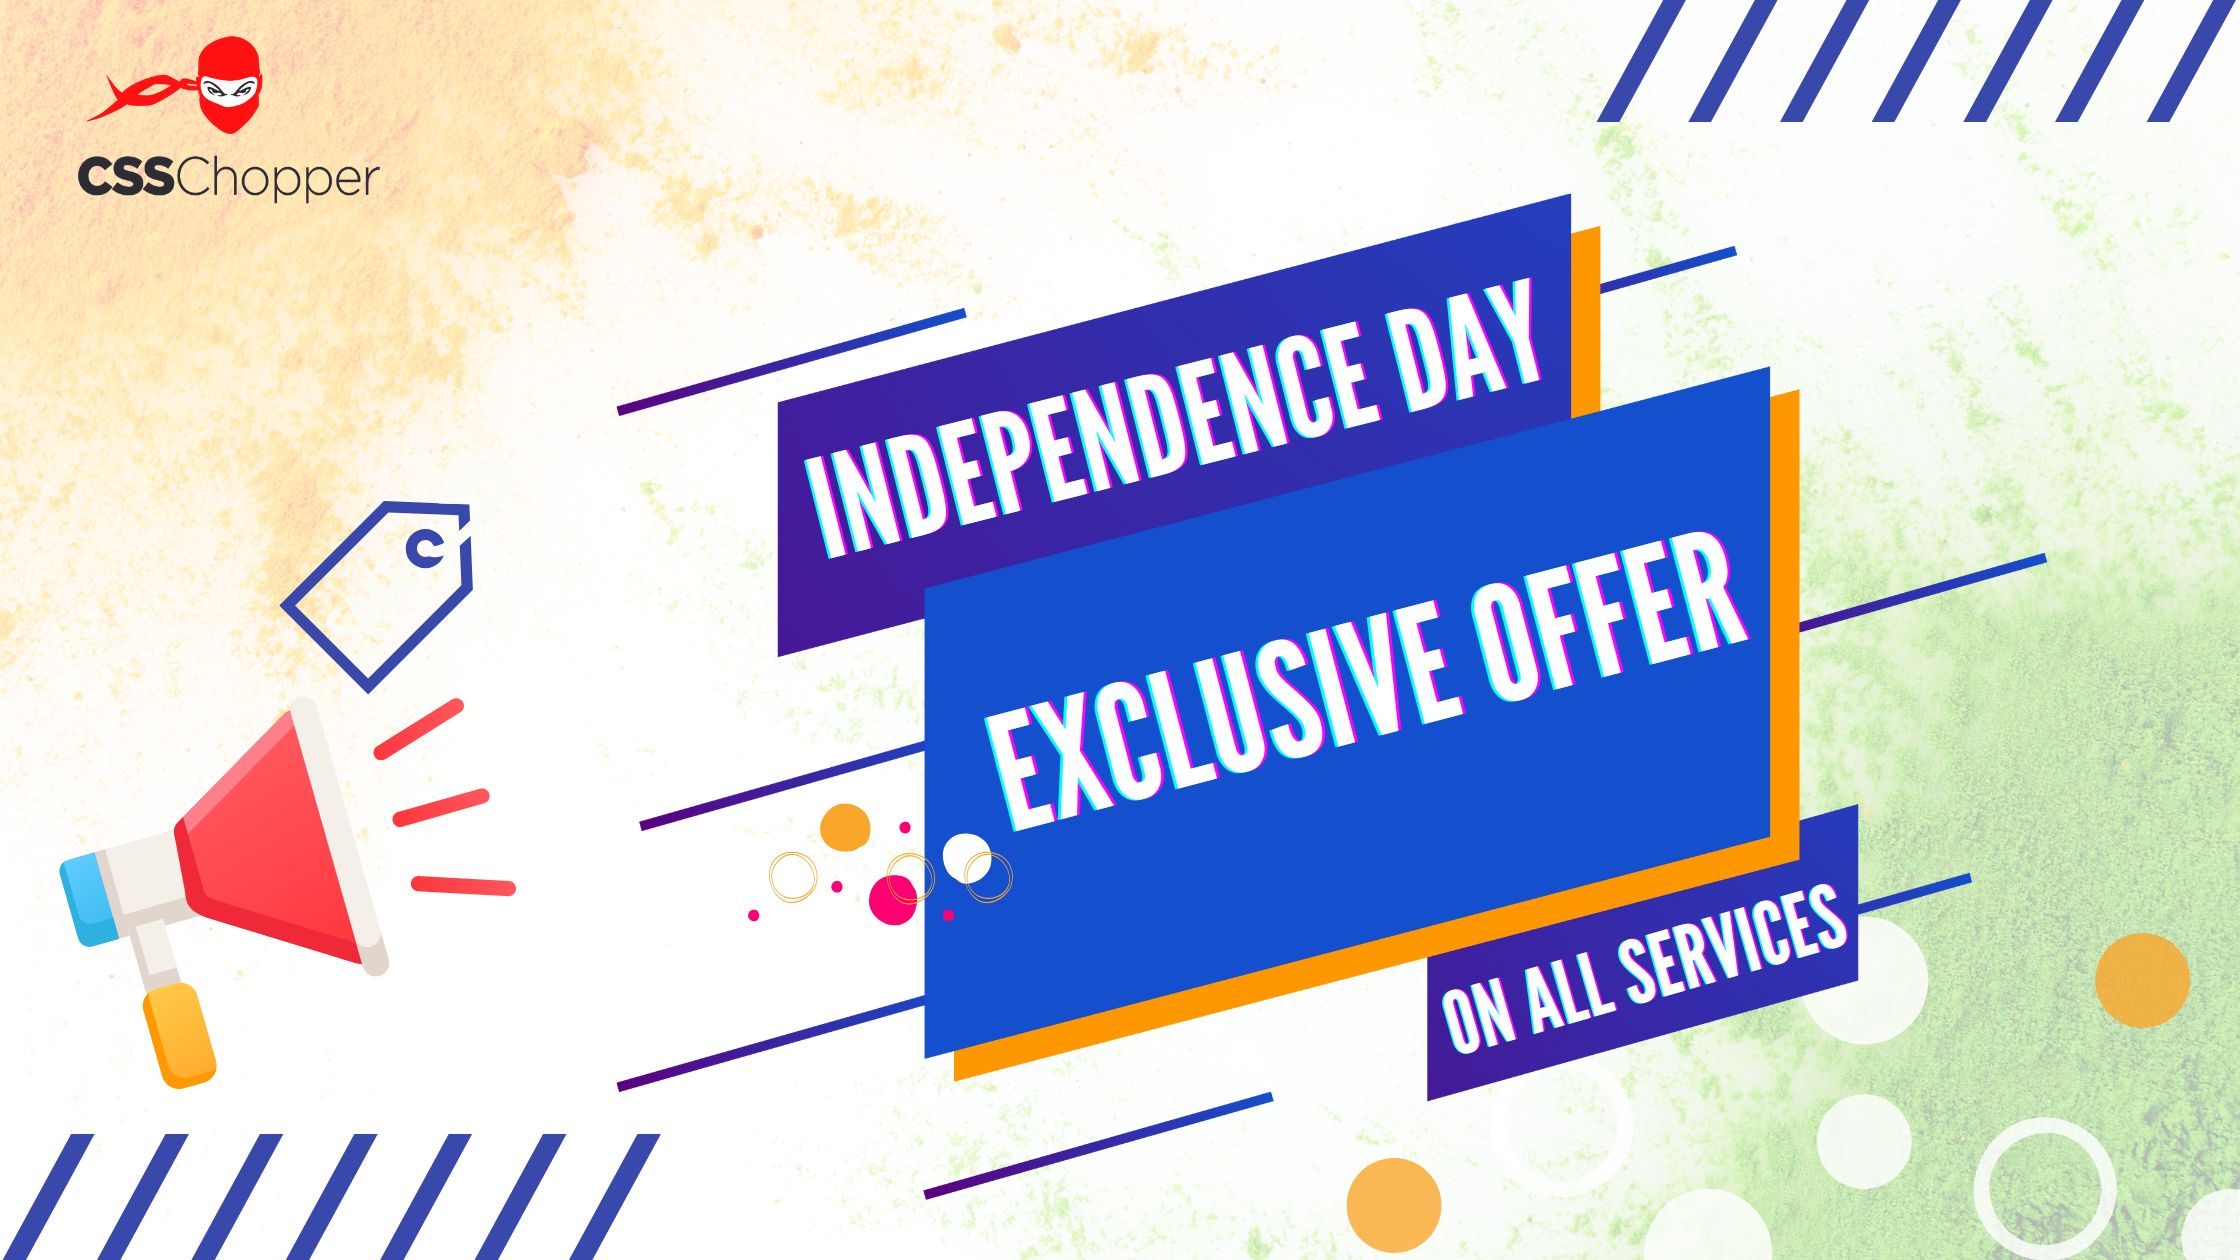 CSSChopper Offers Exclusive Independence Day Discounts On Its Services